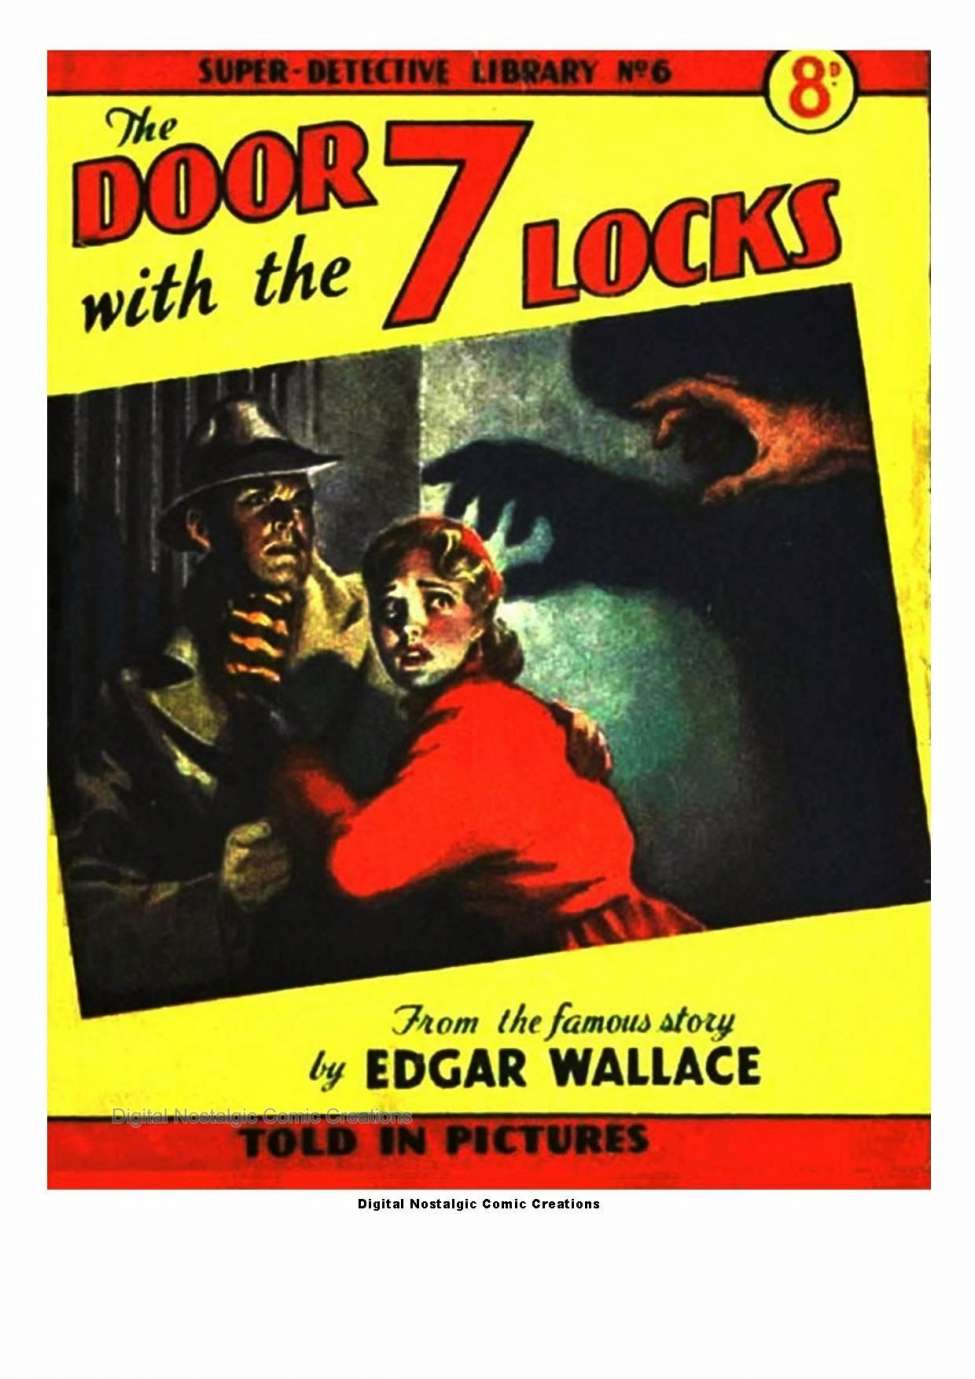 Comic Book Cover For Super Detective Library 6 - The Door with 7 Locks